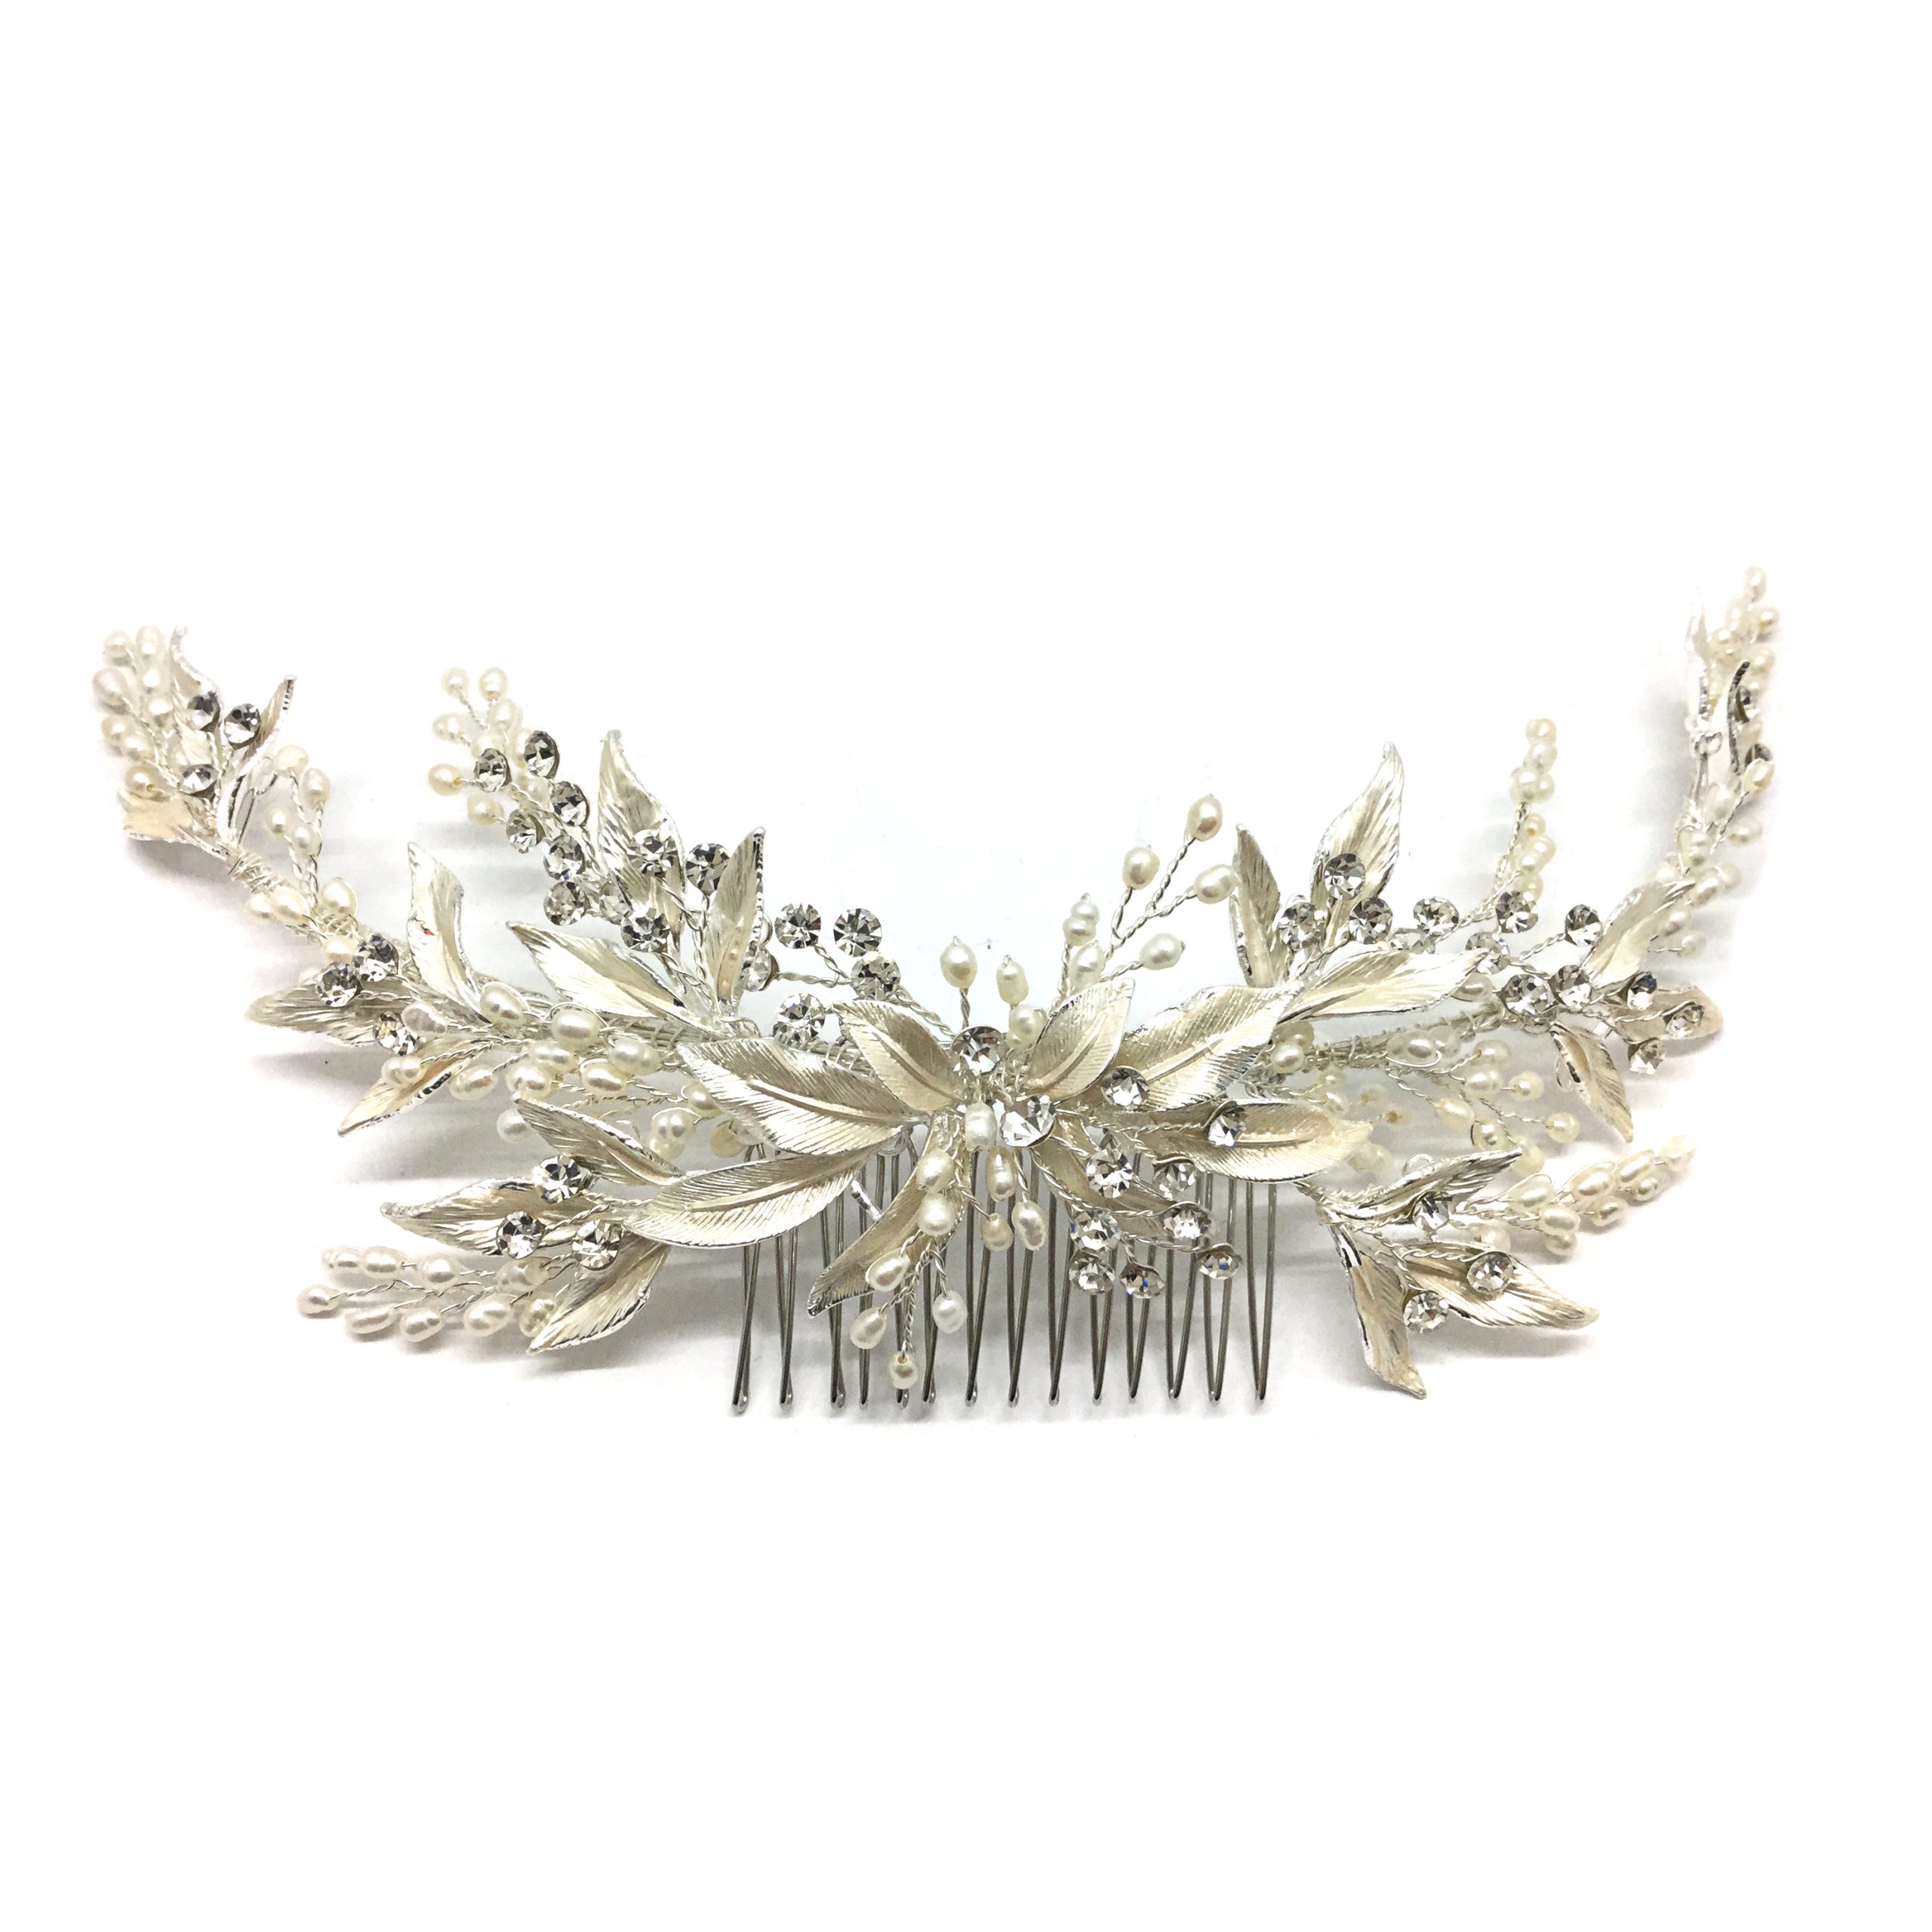 Comb Hair Wedding|Chen|Jeanette Maree|Shop Online Now